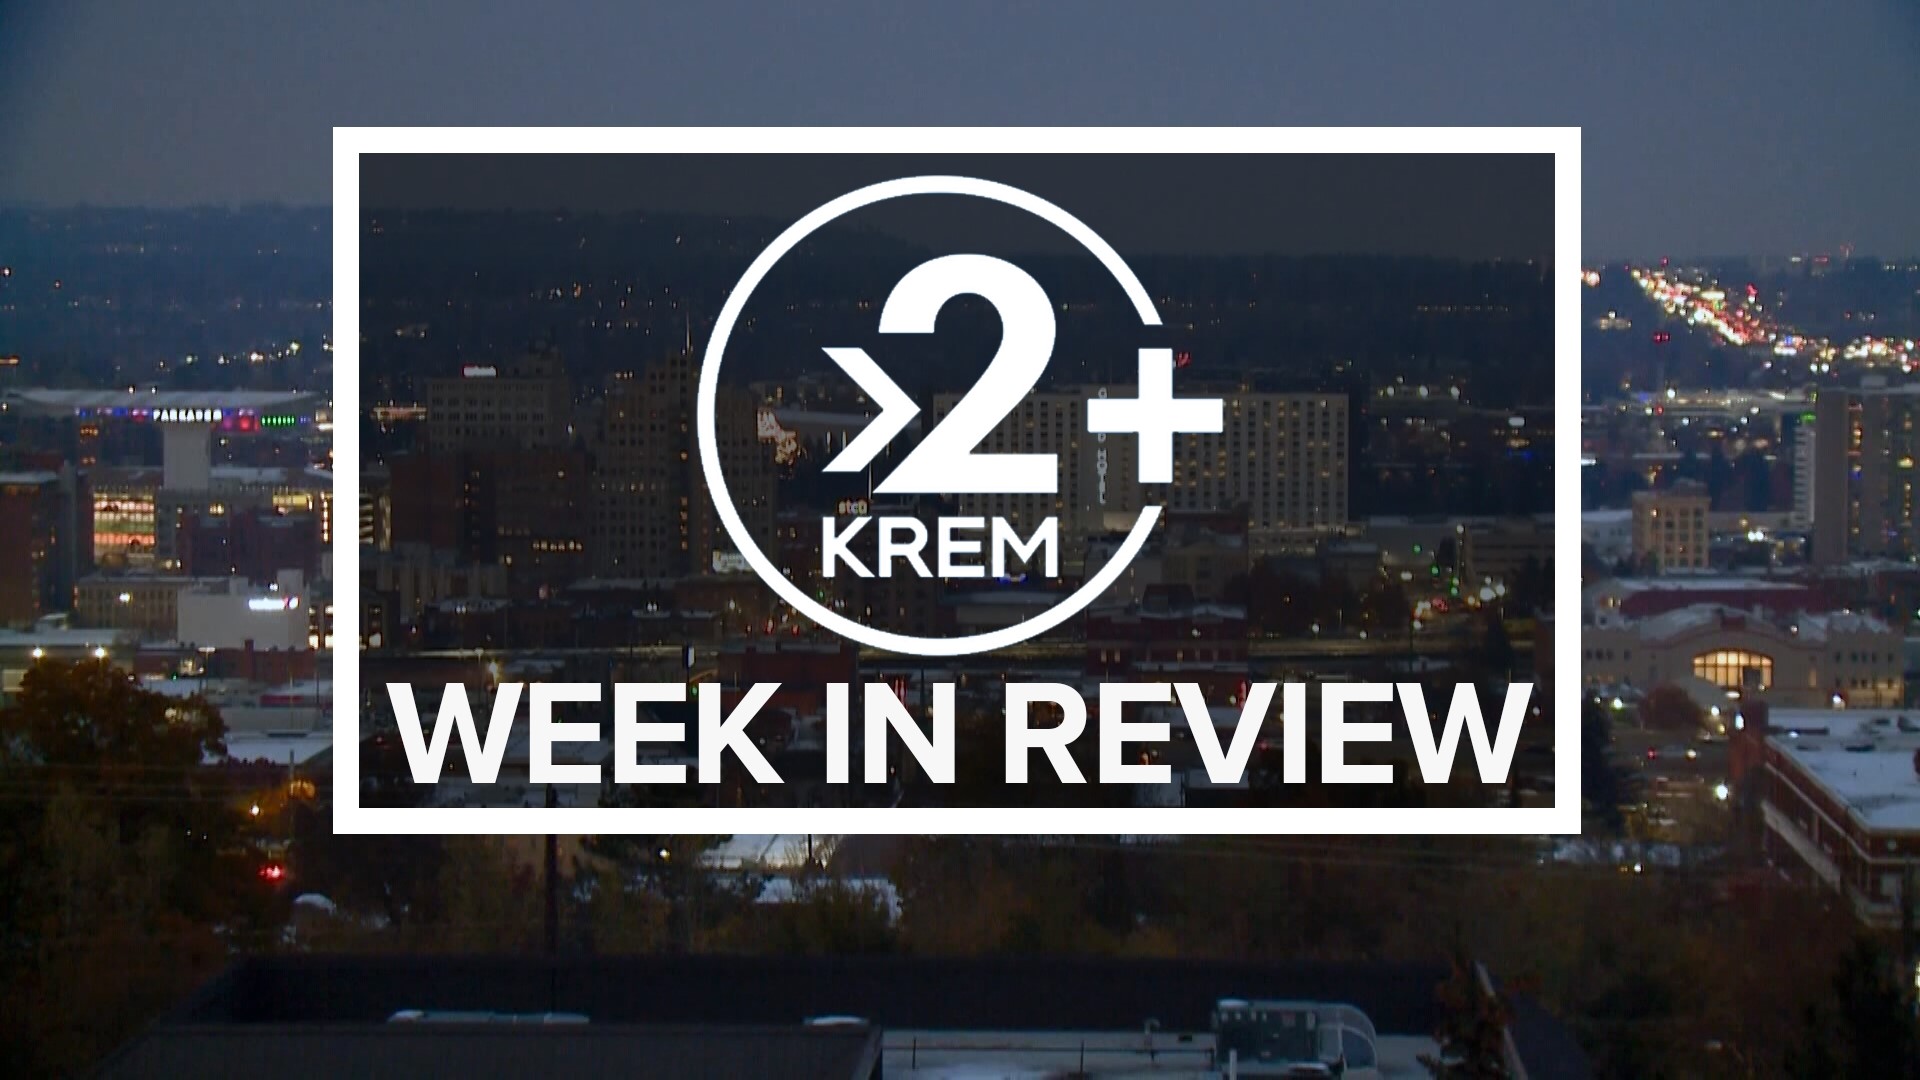 An update on a Spokane homeless camp, development fees, transgender bathrooms in Idaho, new search warrants released in the Moscow murders, and more.